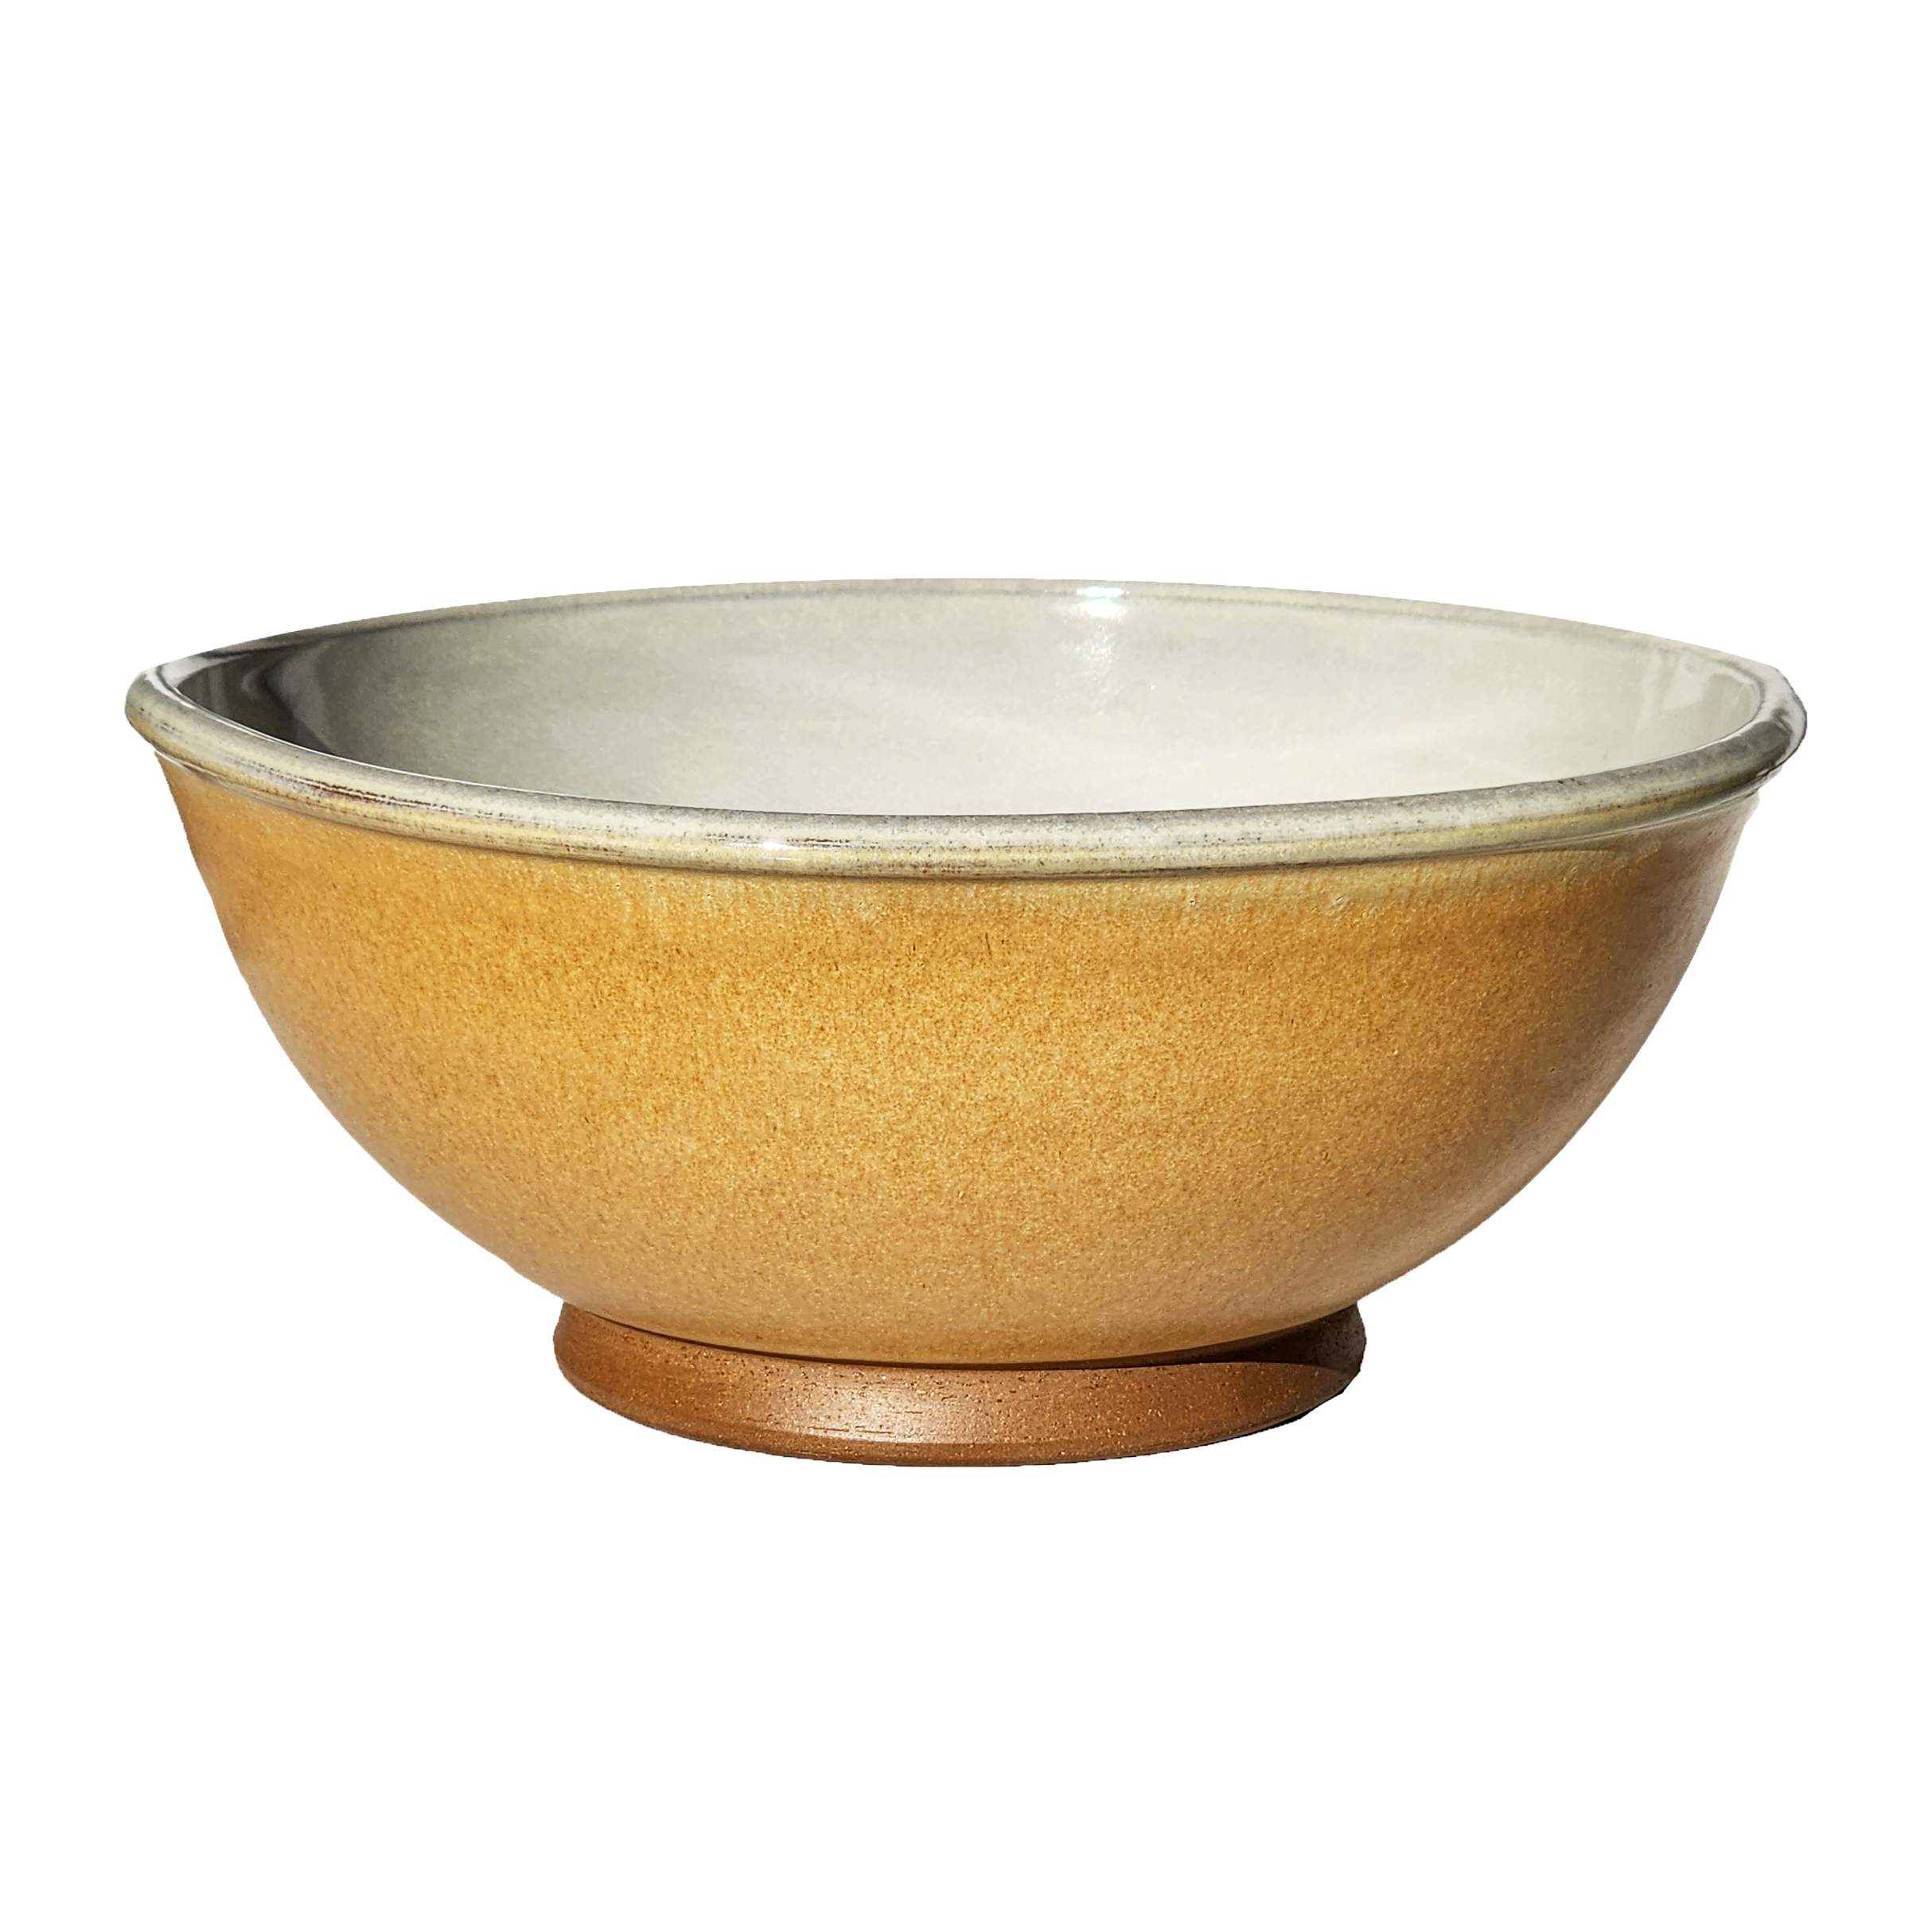 Image: A large mixing bowl in vibrant bumblebee yellow, offering a generous capacity of 12.5 cups. Perfect for mixing ingredients with a sunny pop of color in your kitchen.